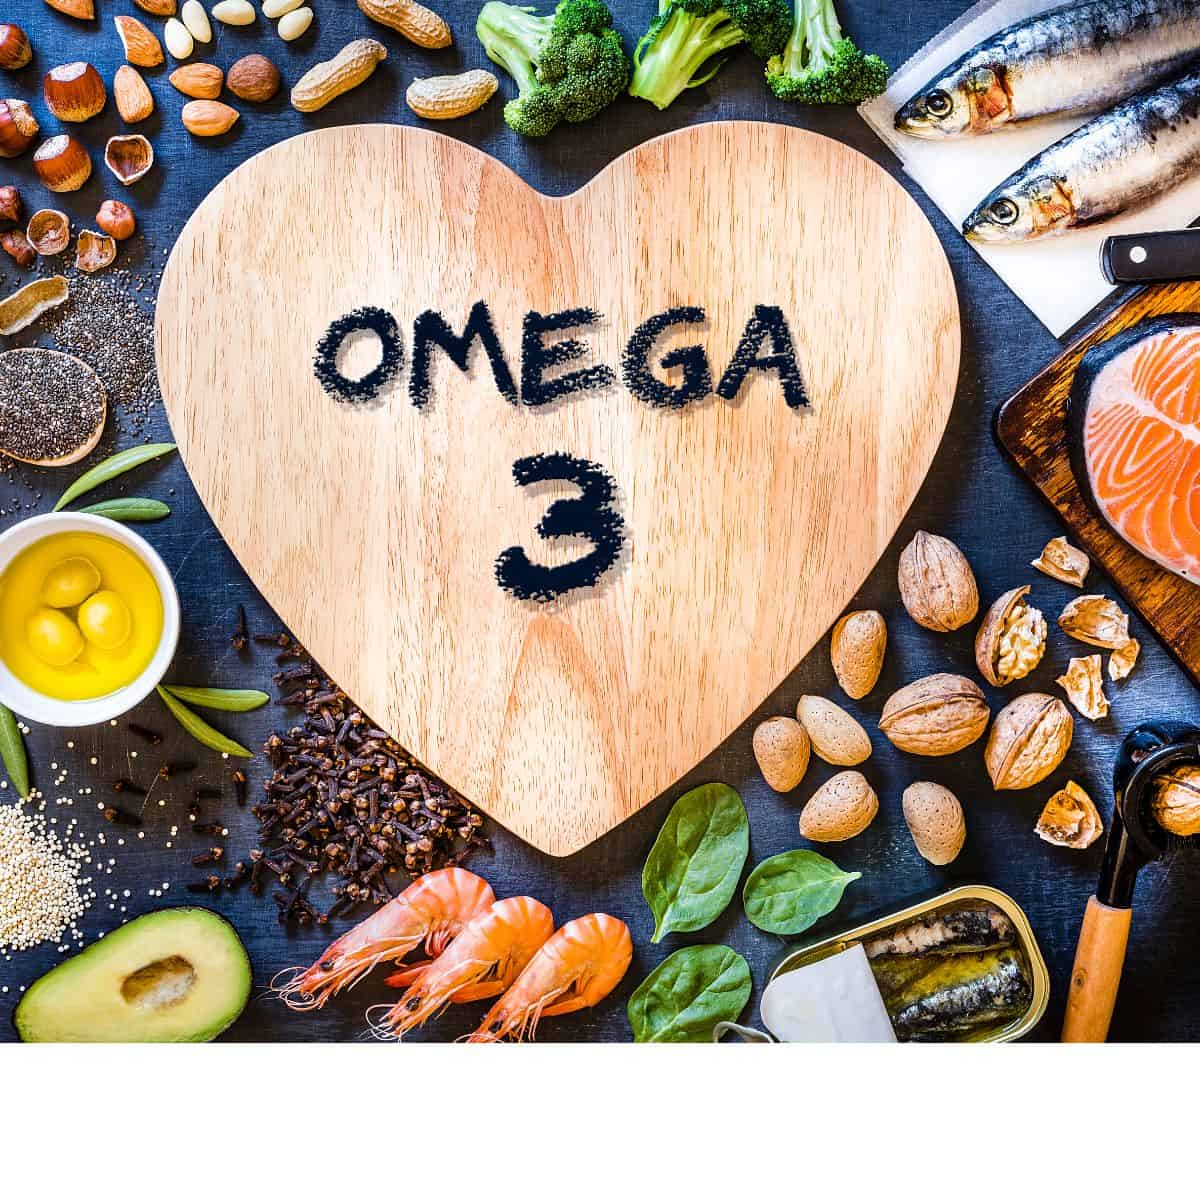 a wooden heart in the middle with black writing that reads omega 3. the heart is surrounded by seafood, spinach, sardines, avocado halves, olive oil, seeds, nuts, and salmon